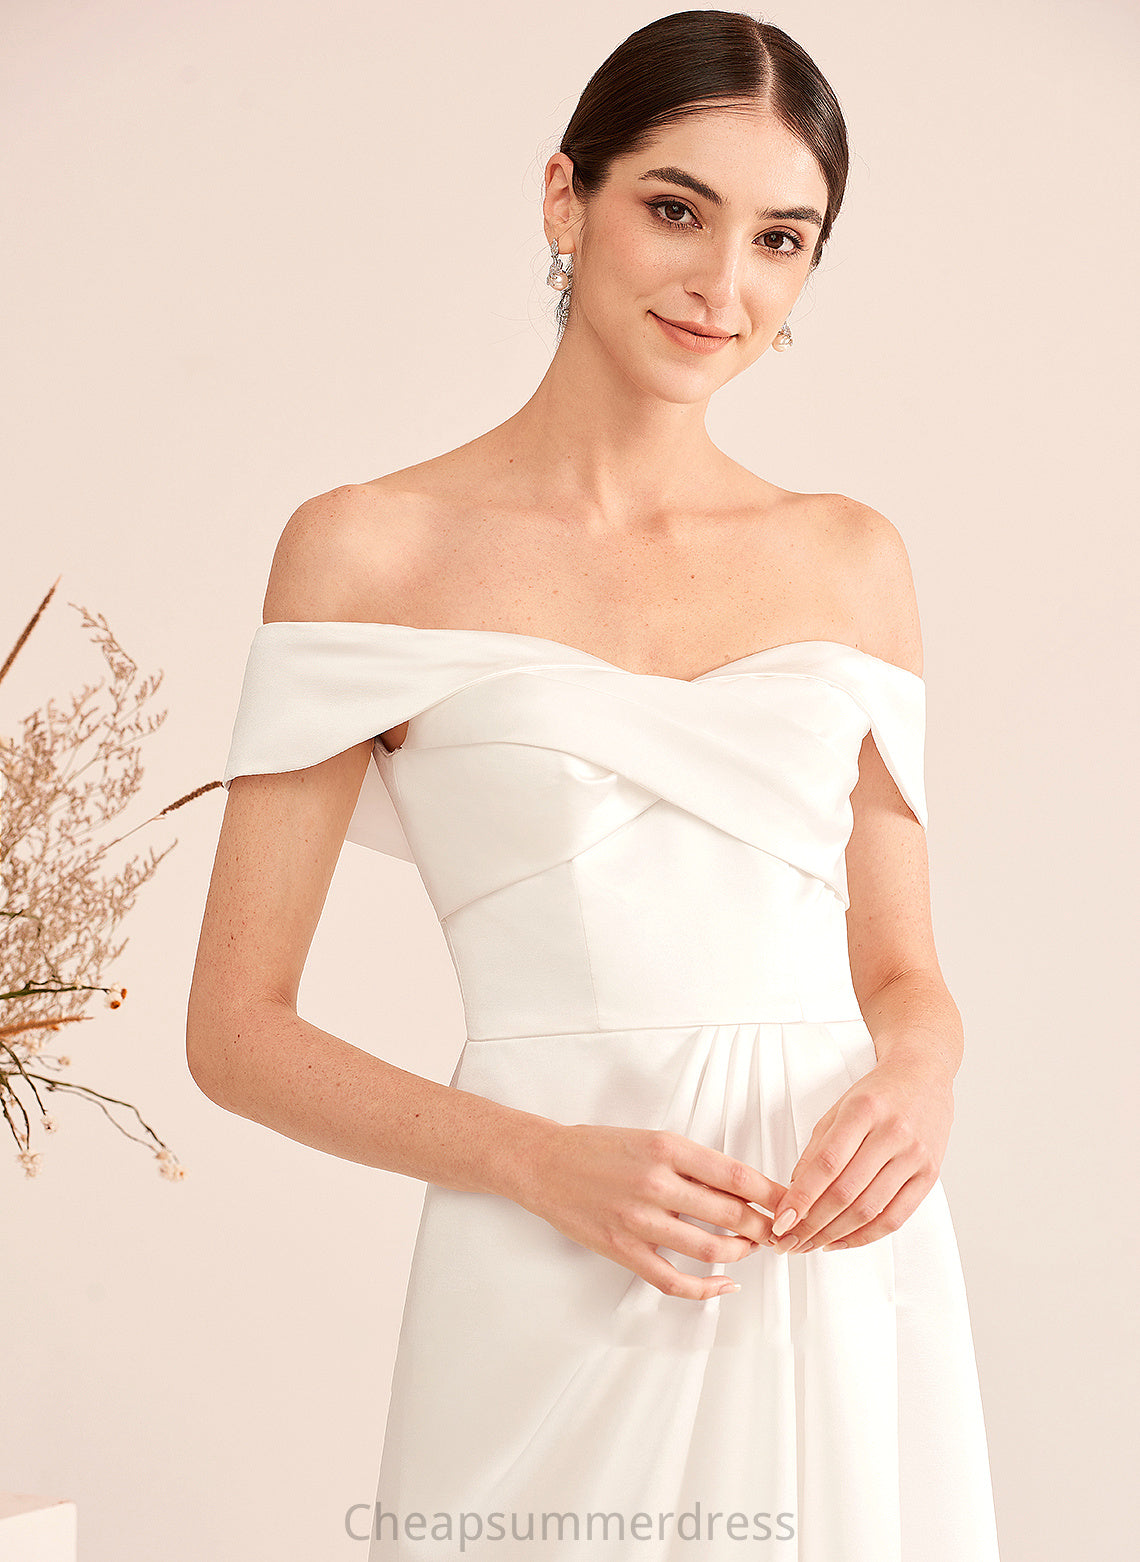 Penny Wedding Dresses Front Wedding Train Sweep Ruffle A-Line Off-the-Shoulder Split With Dress